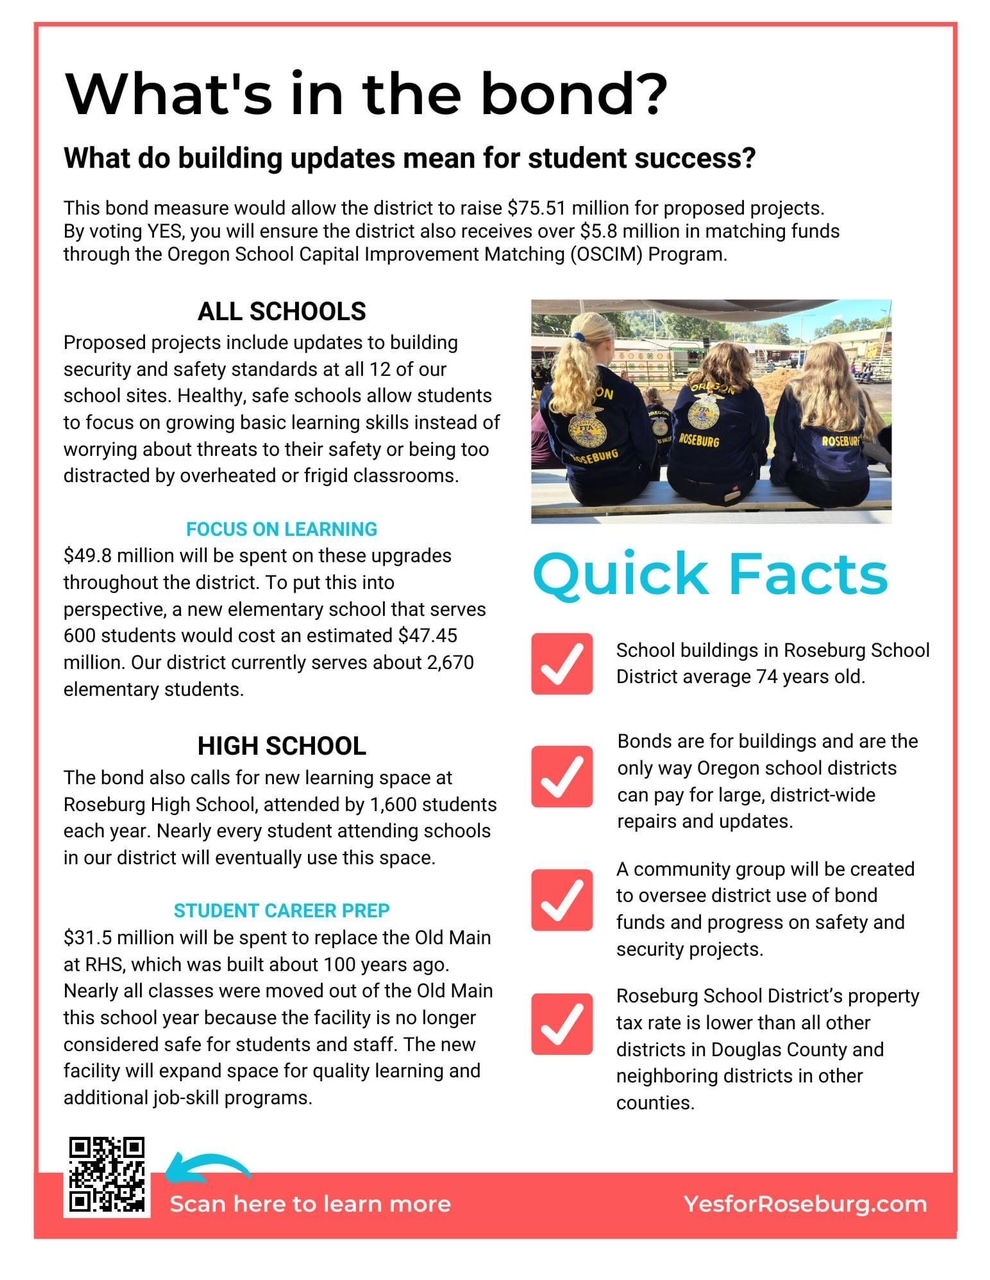 Vote Yes for Roseburg Schools shares quick facts about the bond measure and how it will support student success. 